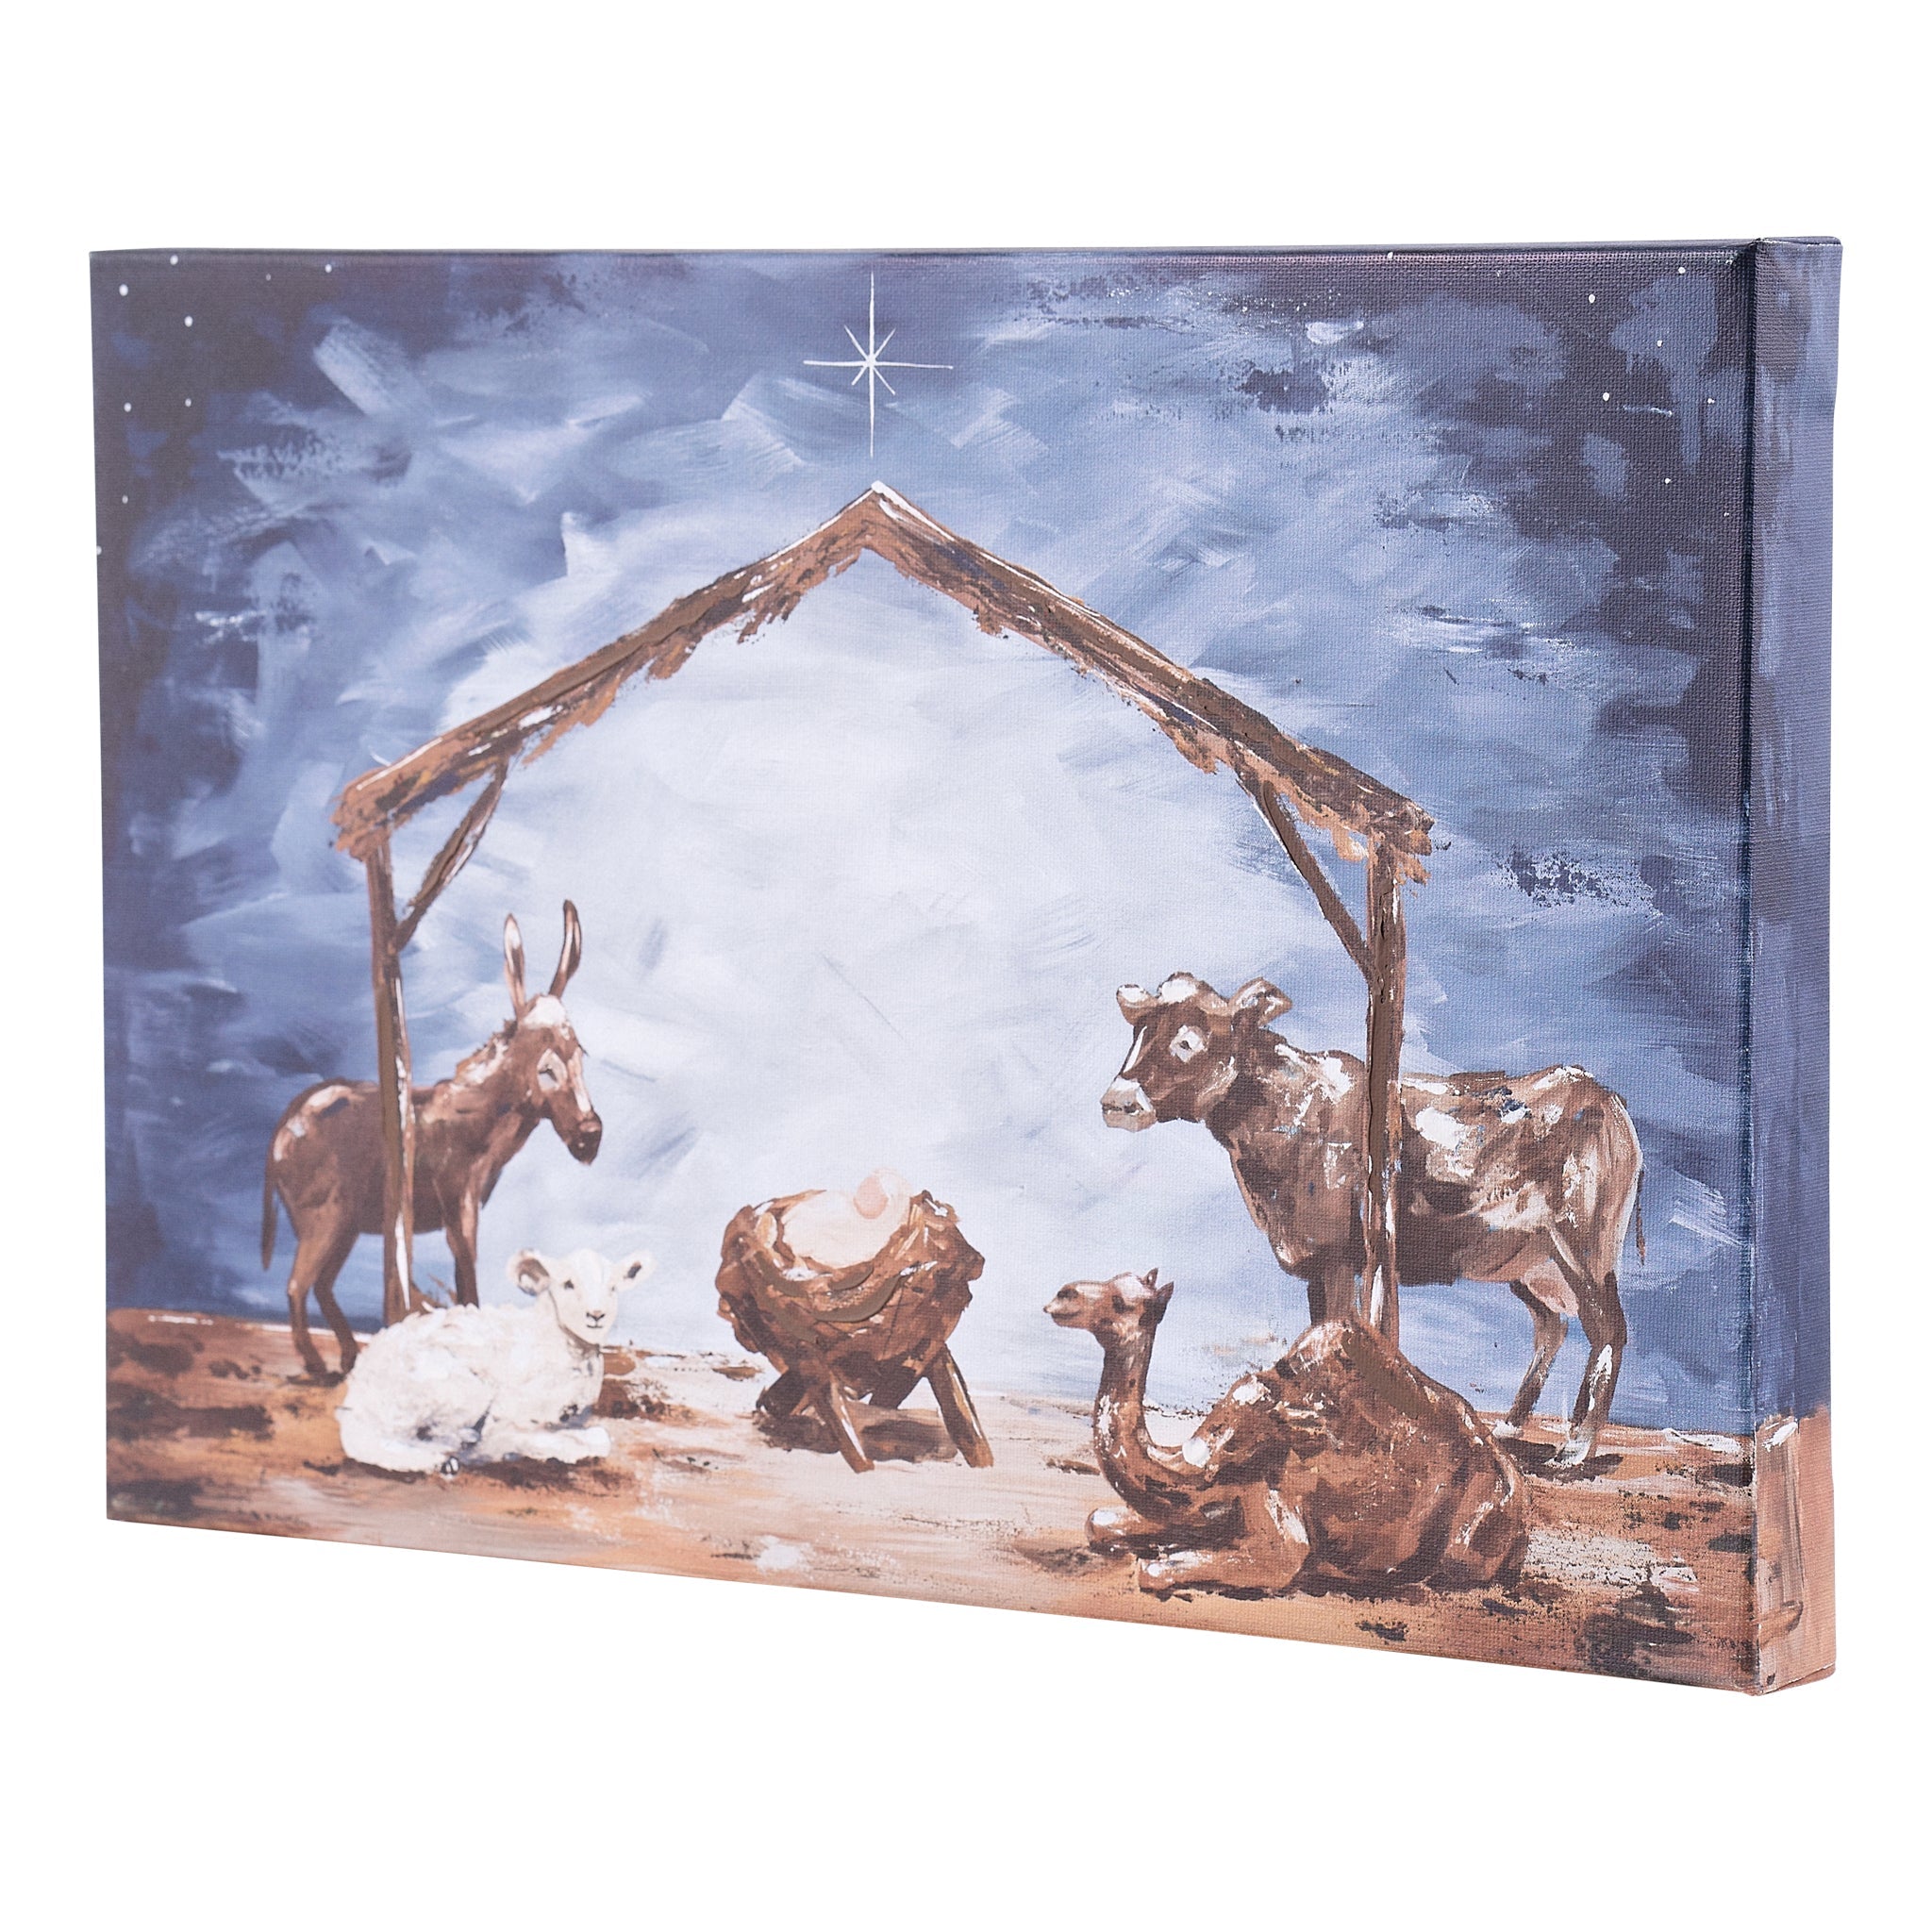 The　GLORY　Starry　–　Reason　With　The　Canvas　Nativity　Night　HAUS　Season　For　Celebrate　A